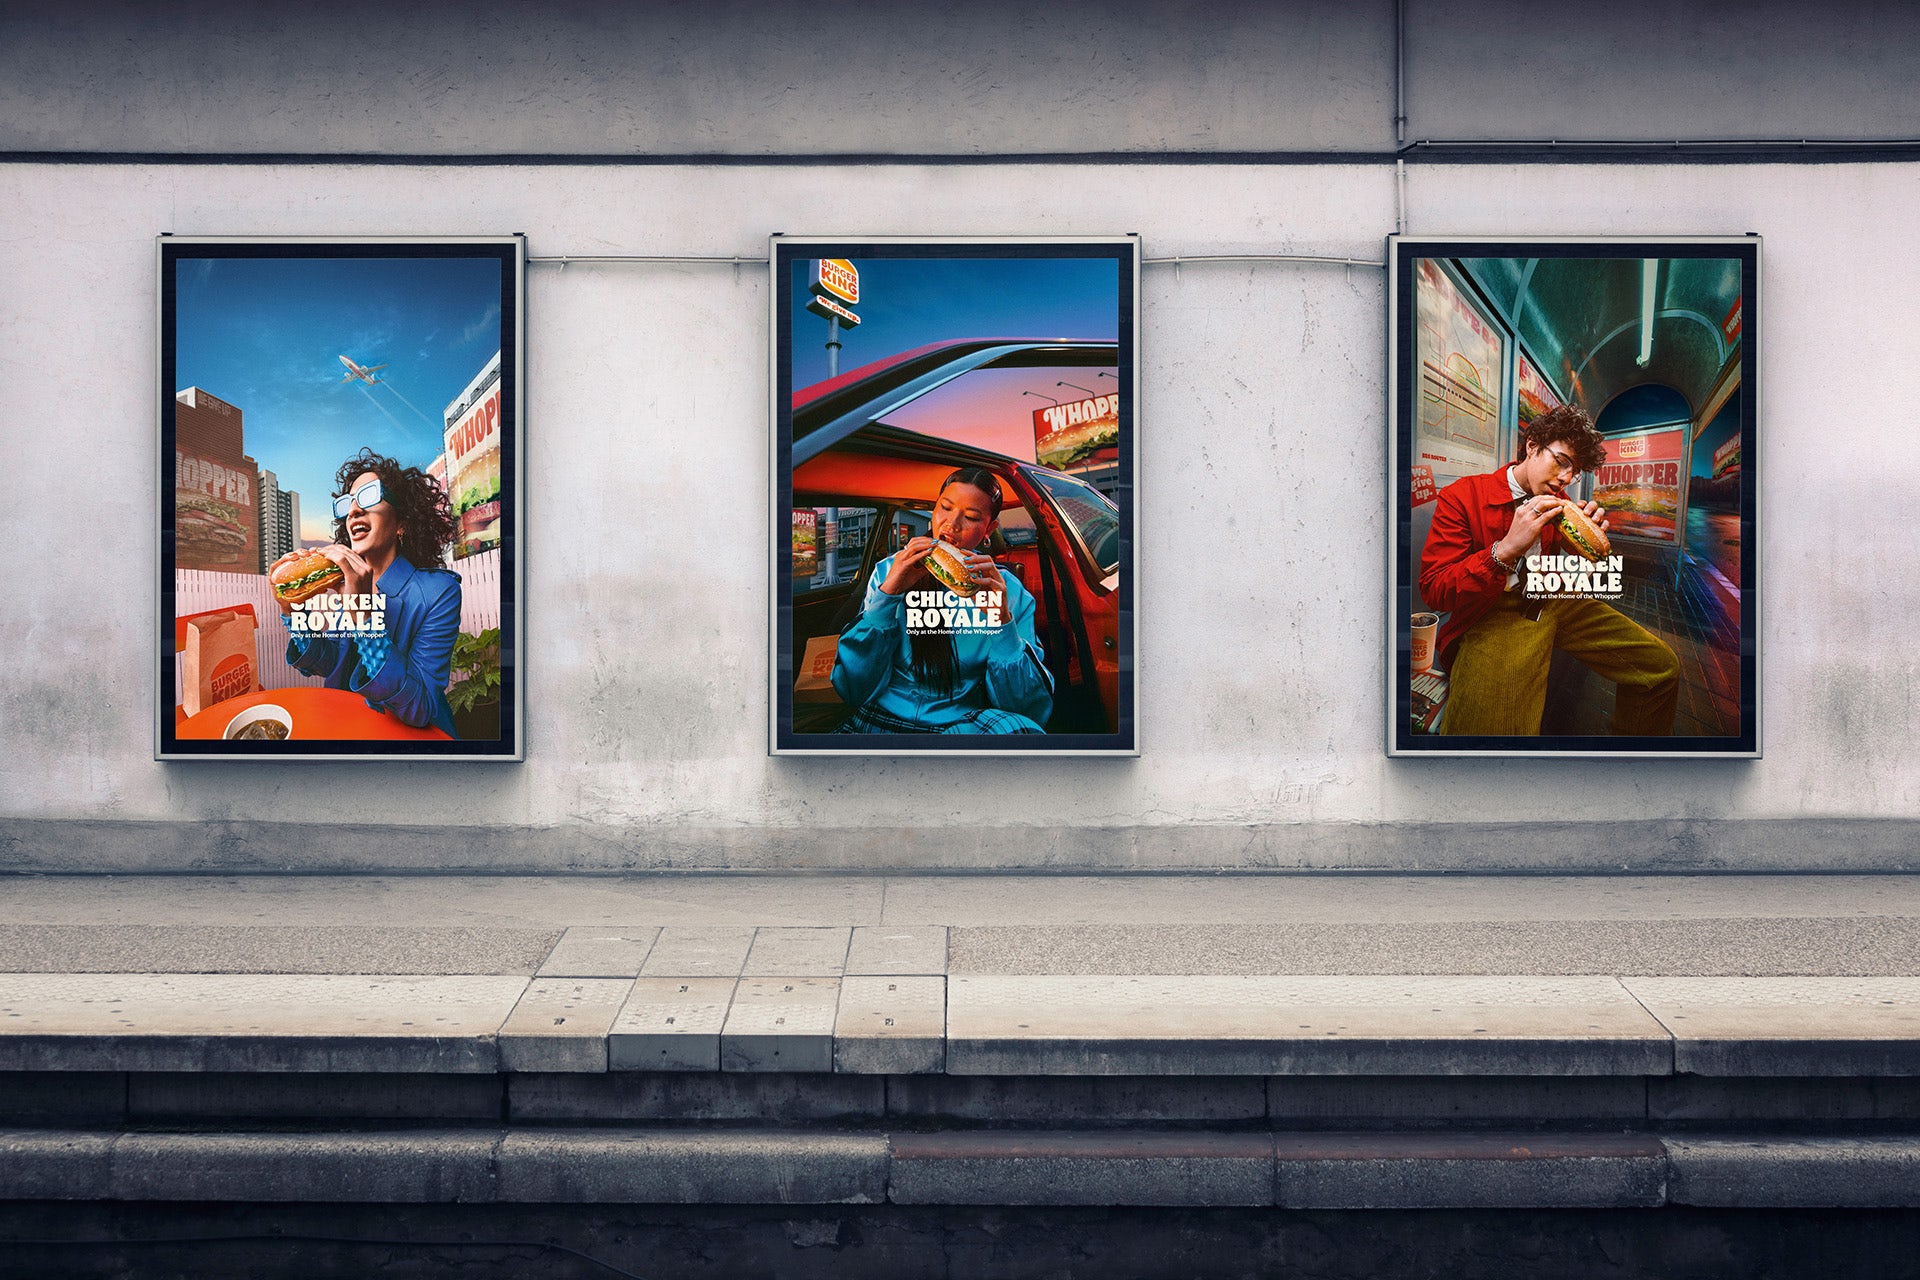 Photo of three vertical outdoor posters for Burger King, each showing a person wearing a colourful outfit eating a Chicken Royale, displayed inside a station